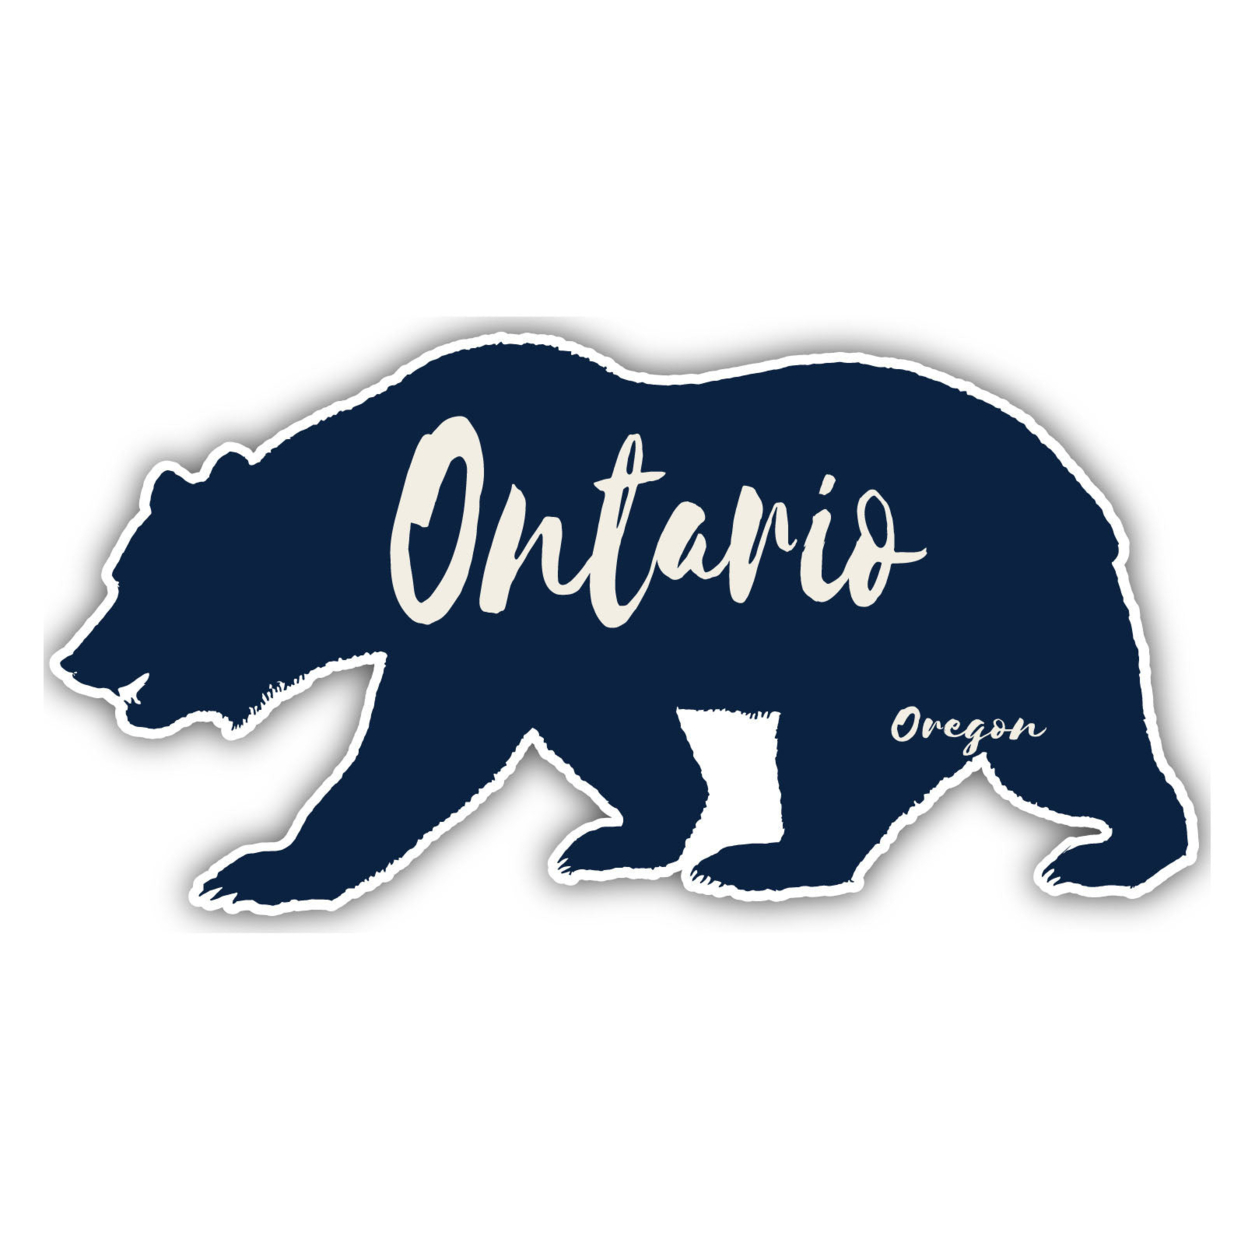 Ontario Oregon Souvenir Decorative Stickers (Choose Theme And Size) - Single Unit, 4-Inch, Great Outdoors